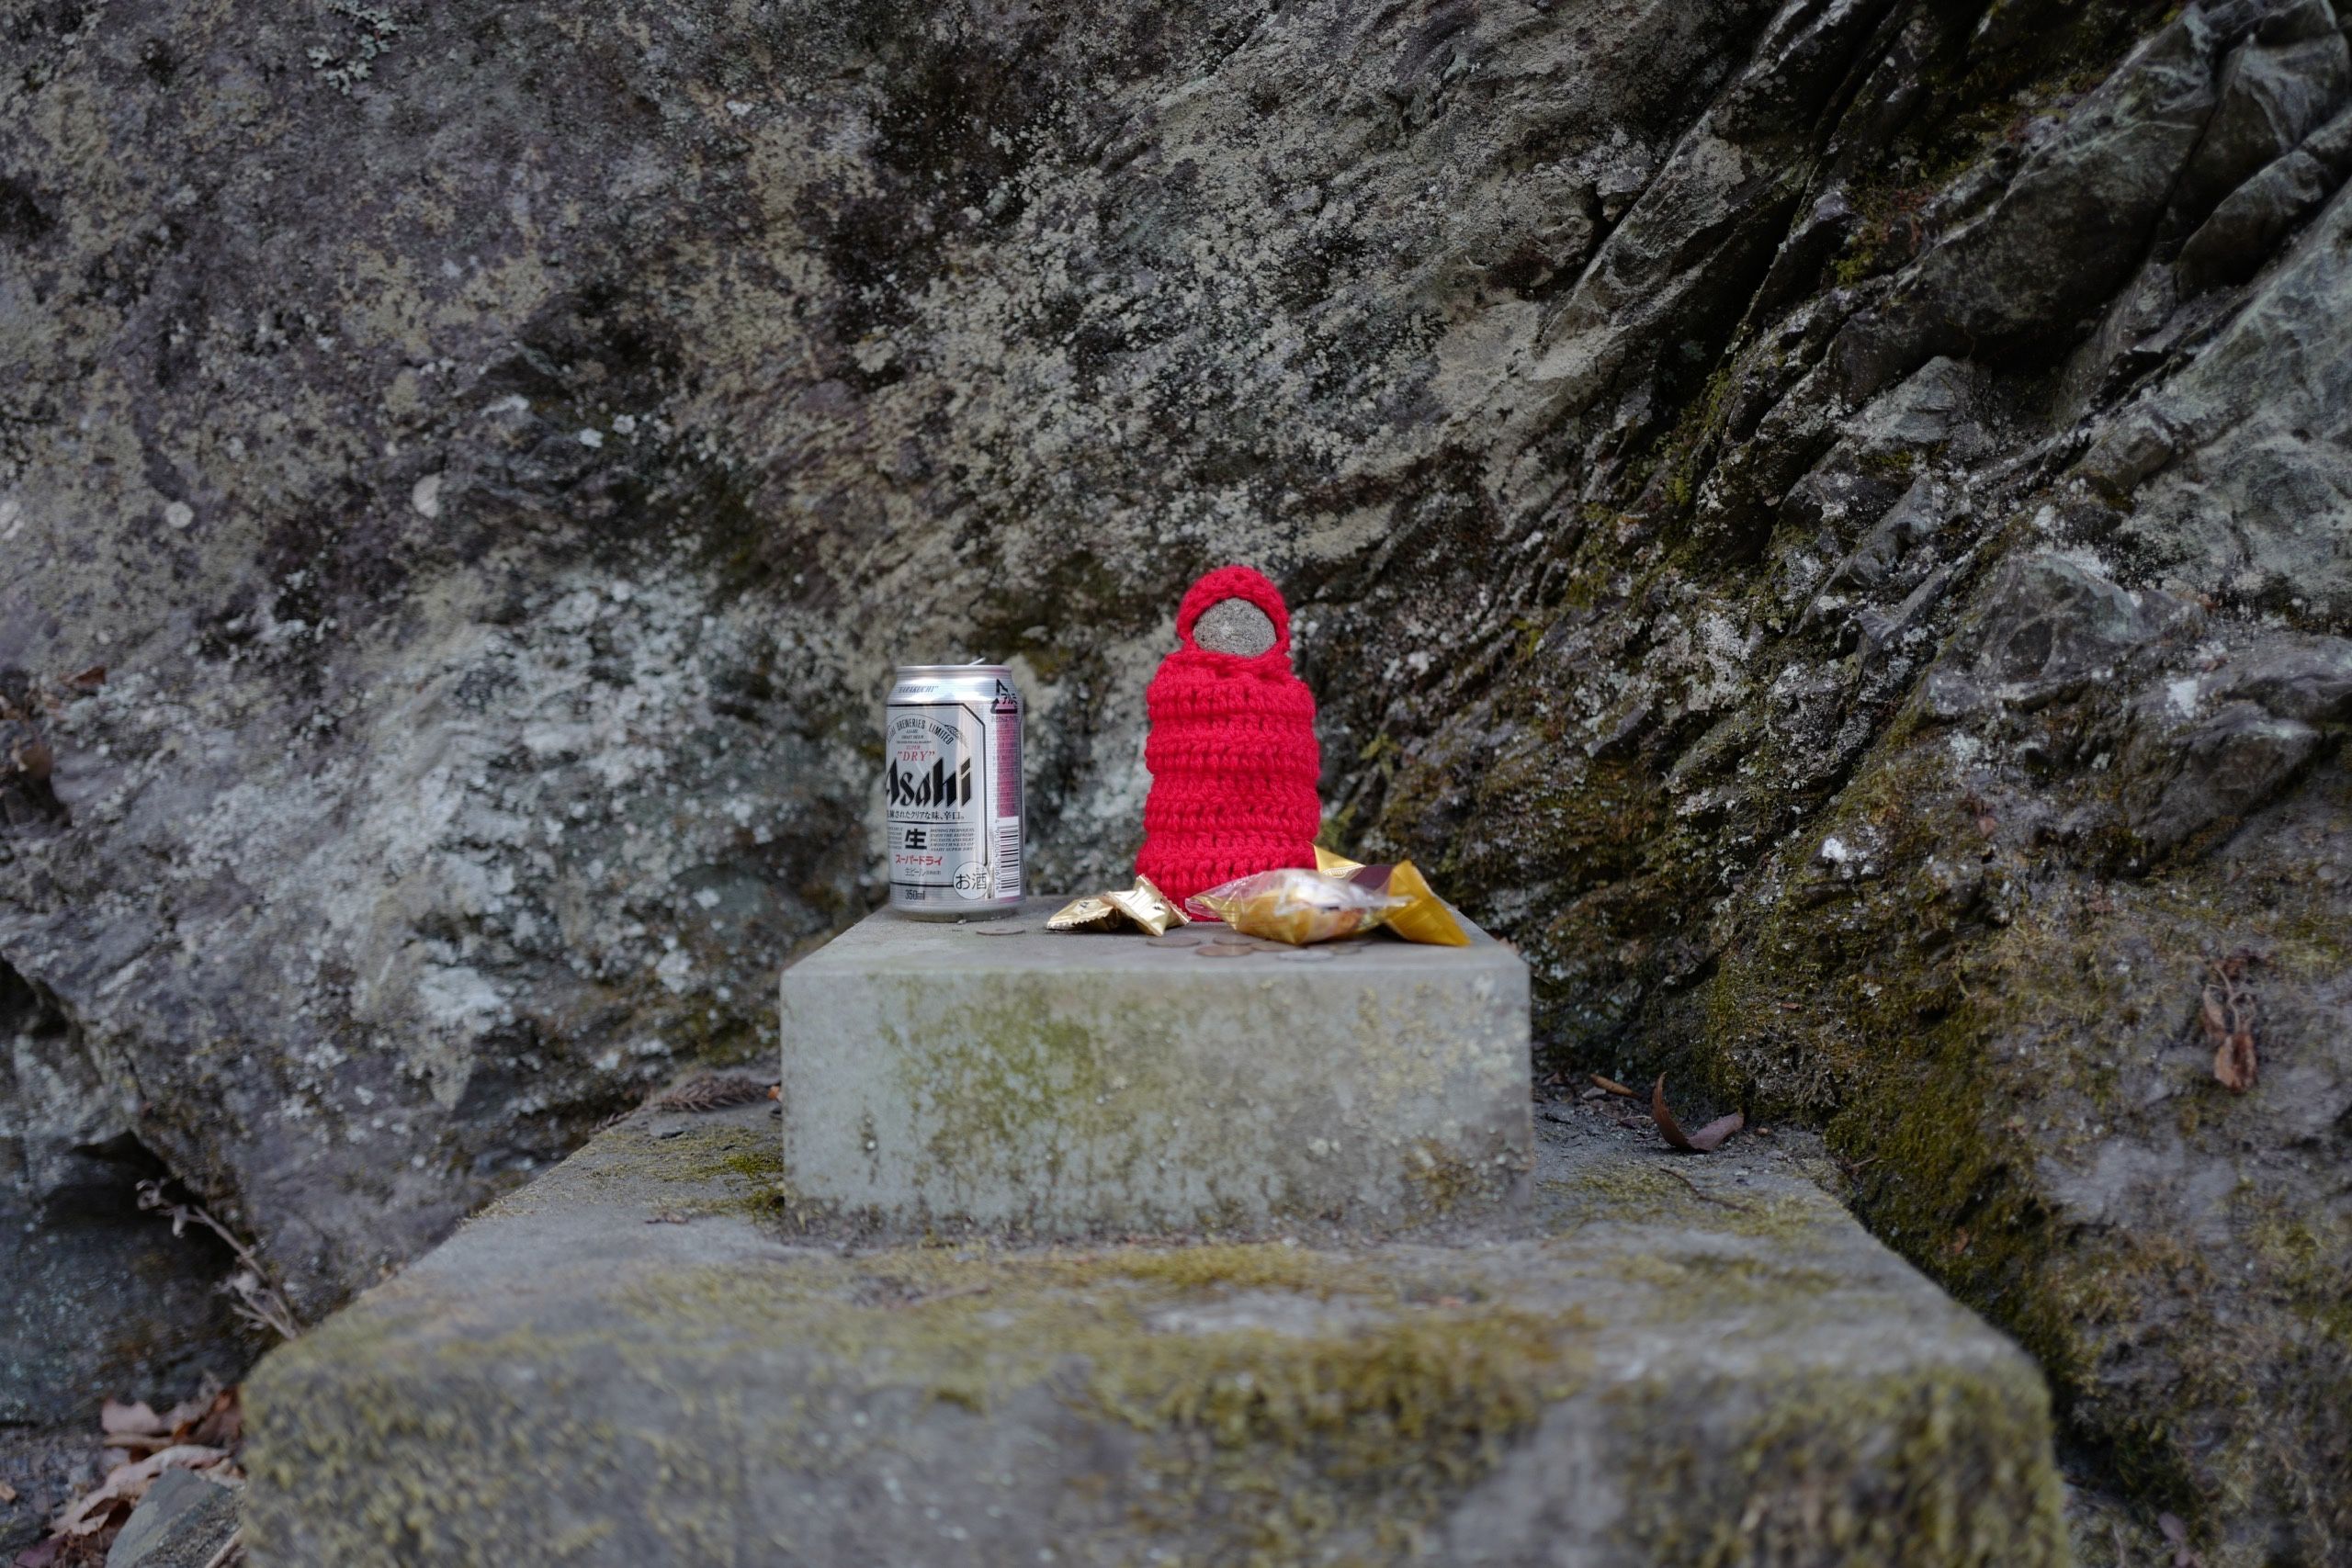 A small roadside deity in a red jumper, about the size of a can of beer, stands on a shrine next to an actual can of beer.